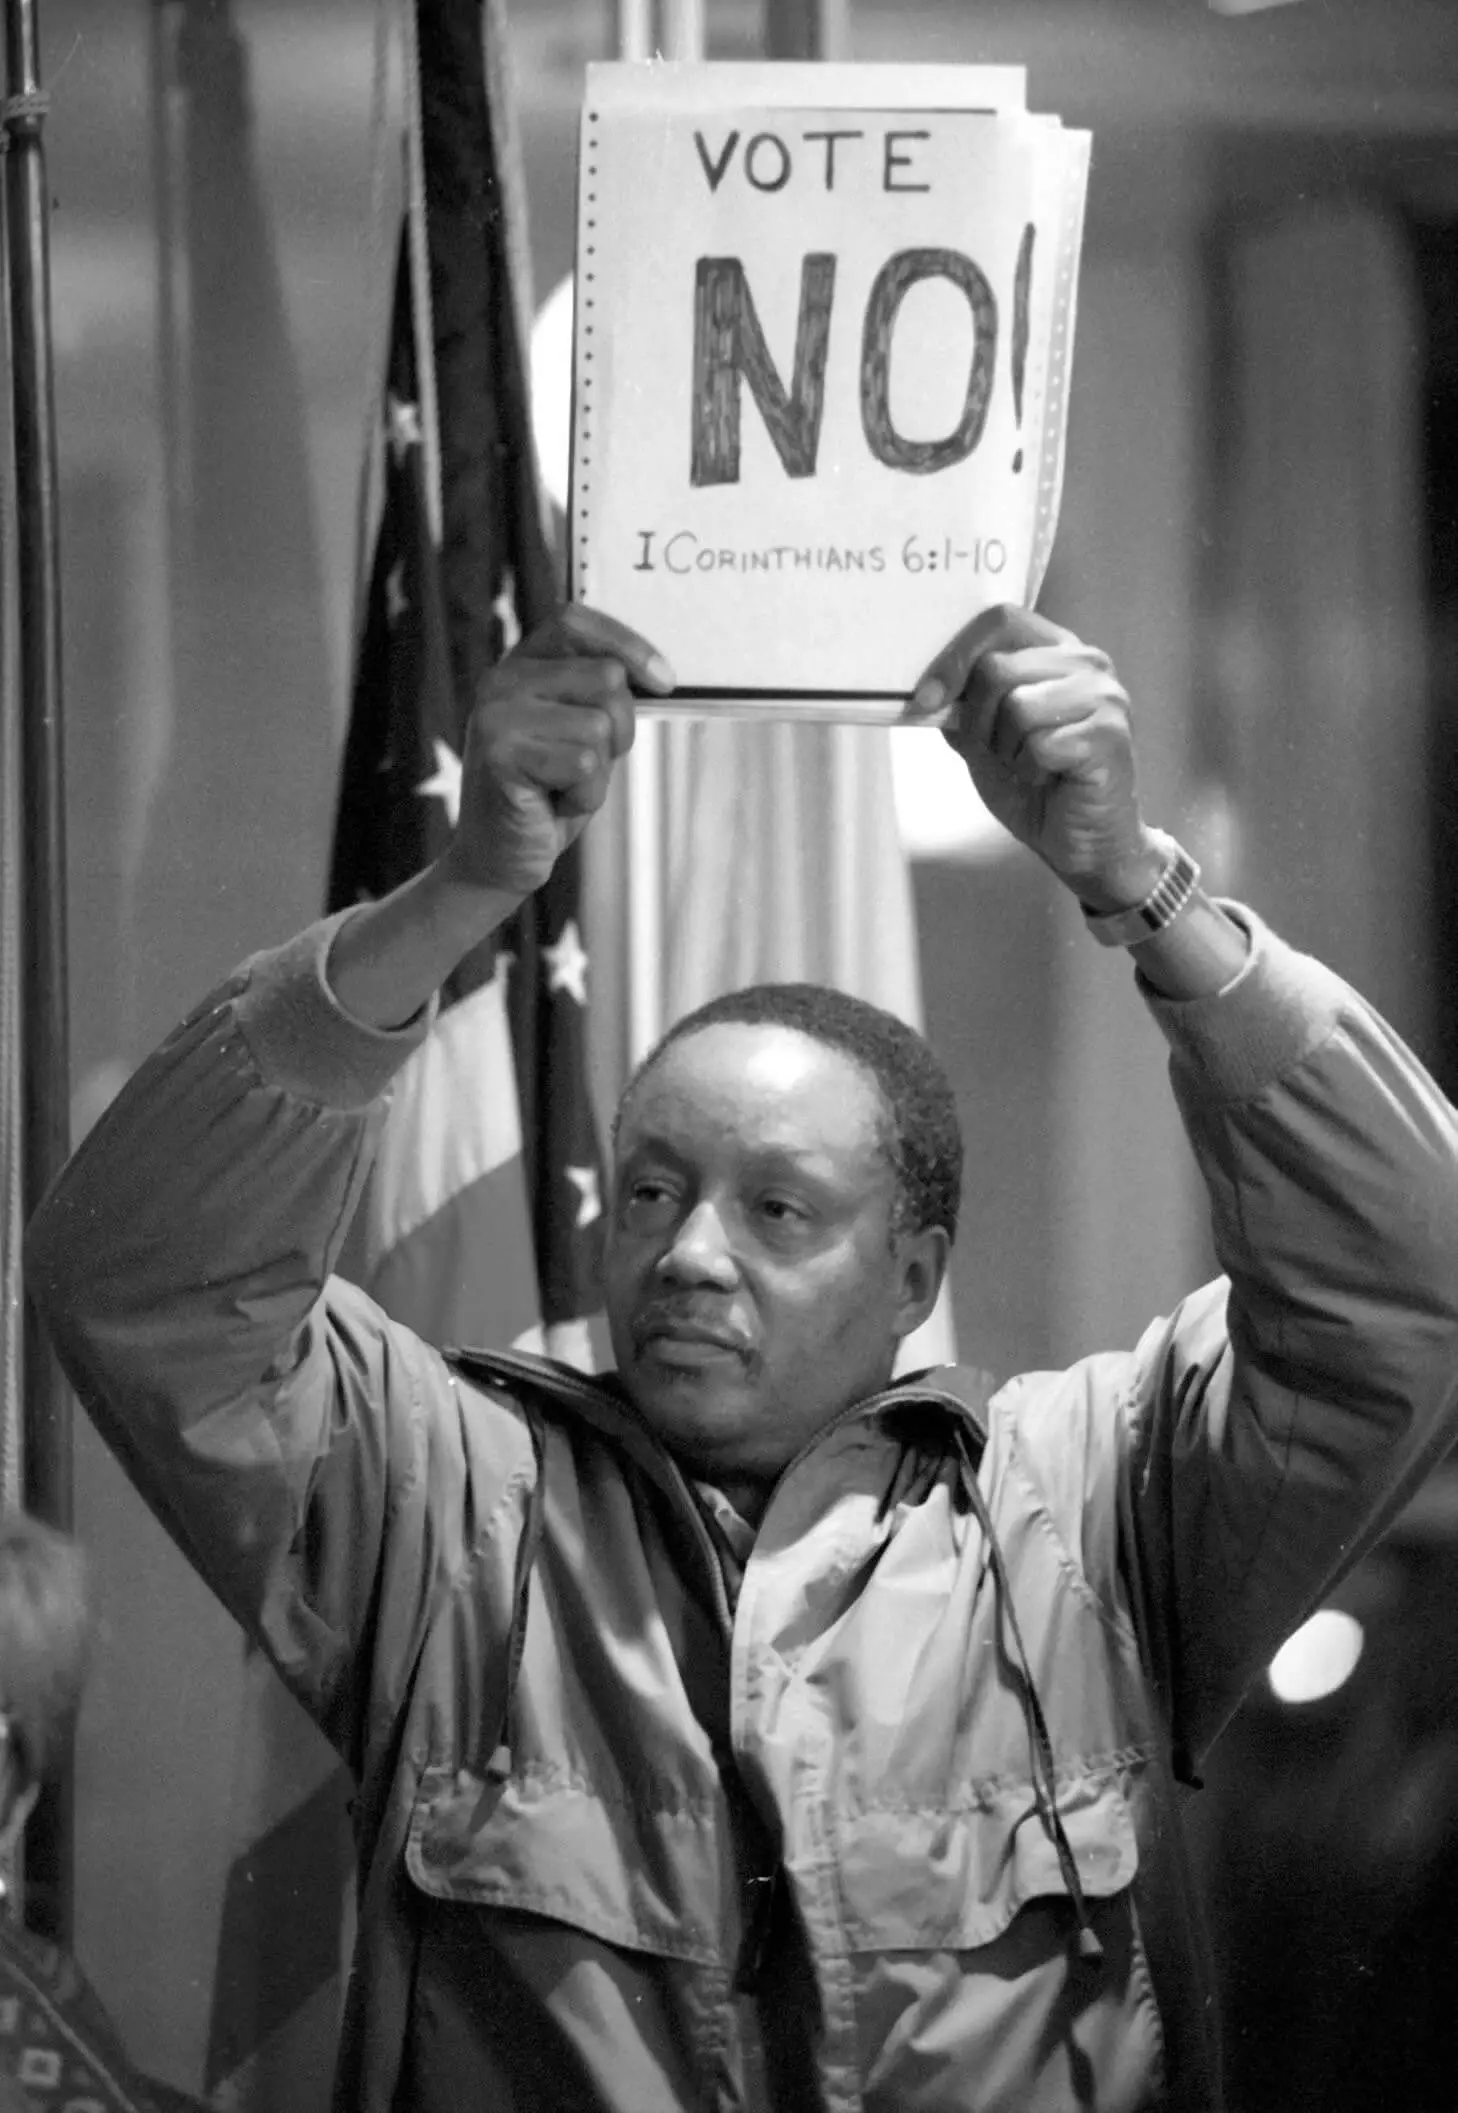 Black and white photo of a Black man wearing a jacket holding a sign over his head.